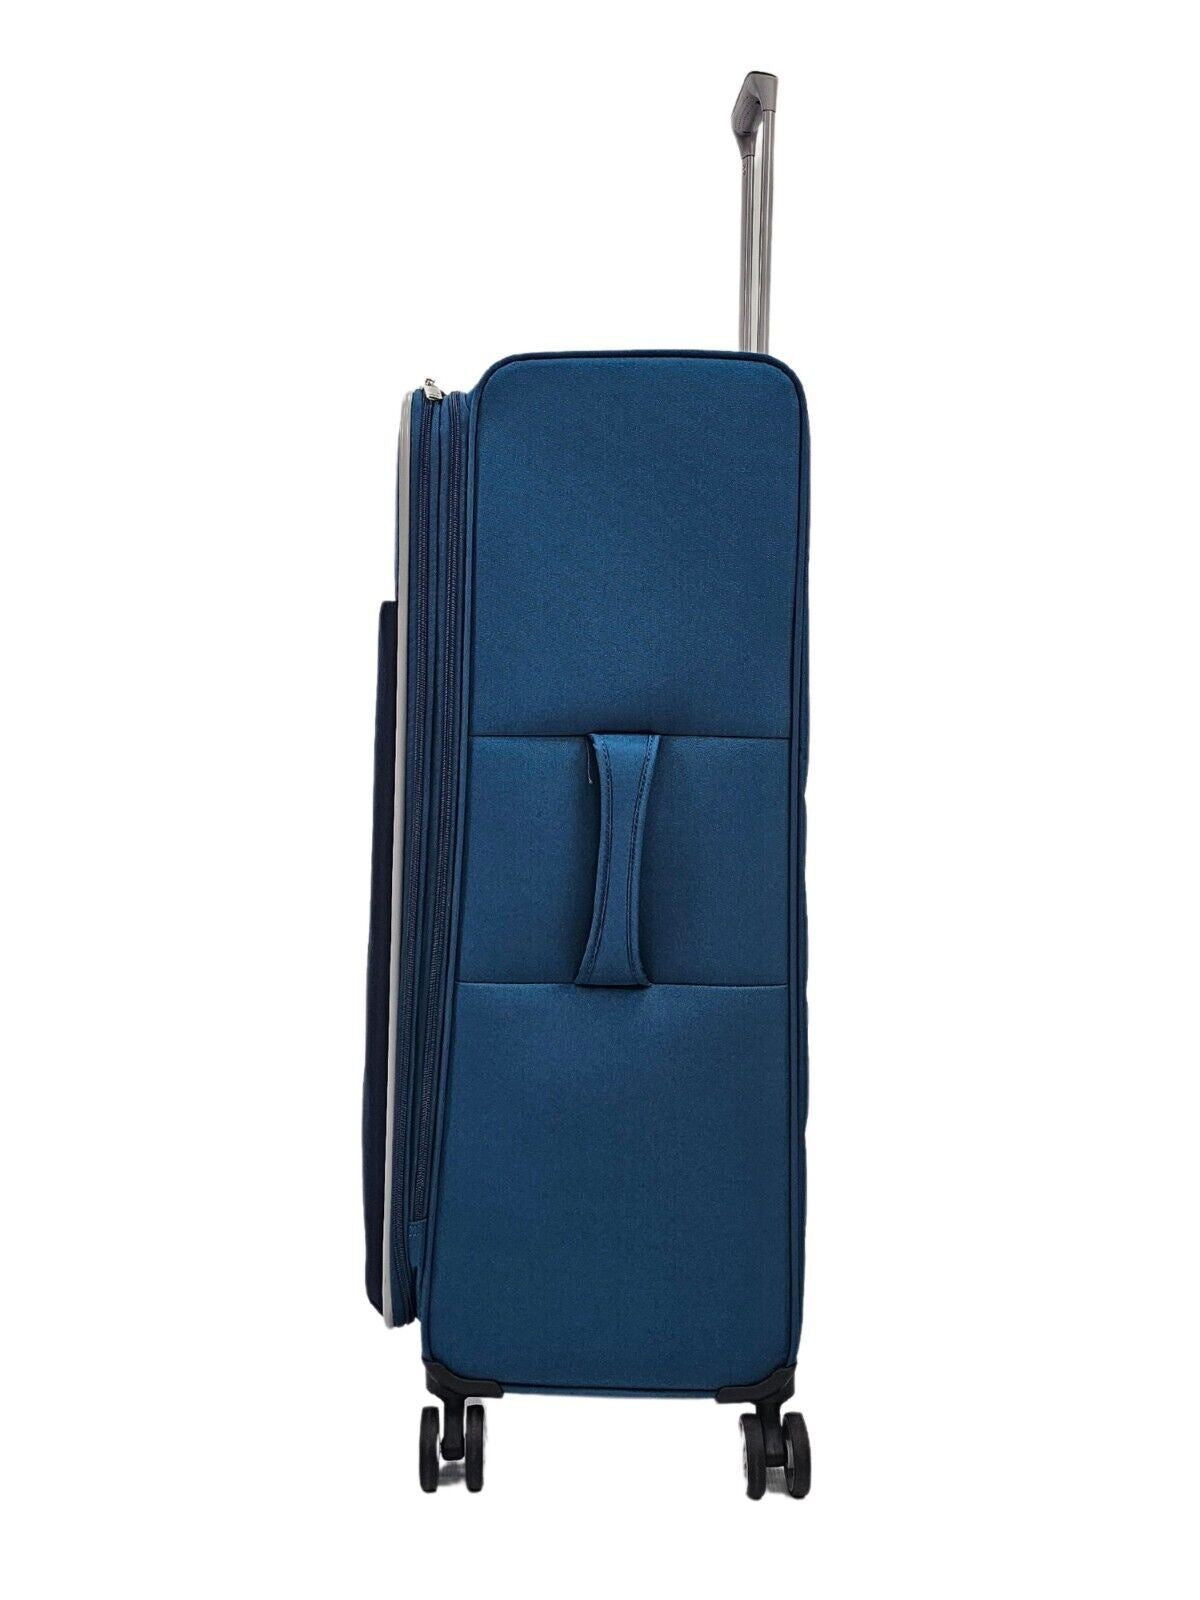 Lightweight Teal blue Cabin Suitcases 4 Wheel Luggage Travel Bag